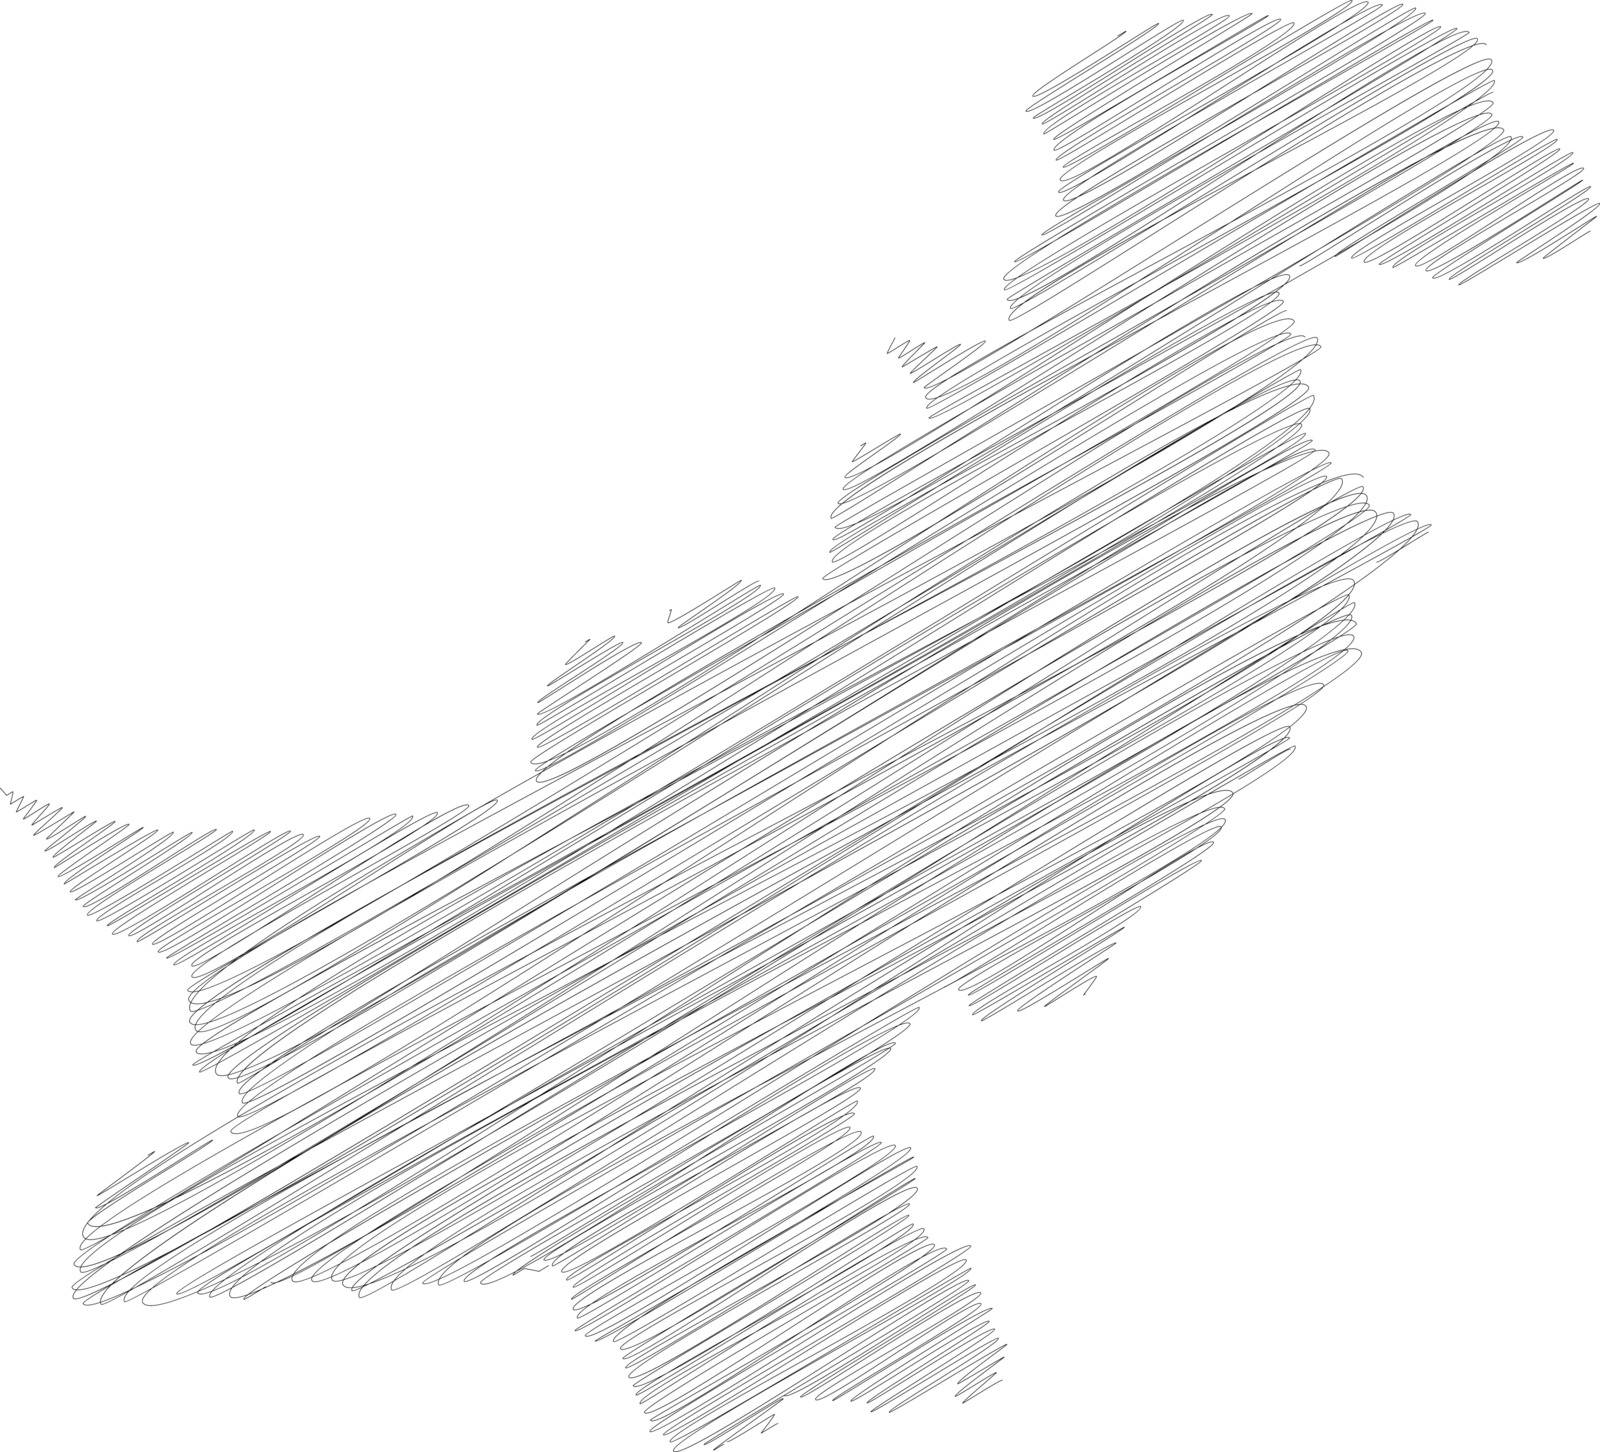 Pakistan - pencil scribble sketch silhouette map of country area with dropped shadow. Simple flat vector illustration.